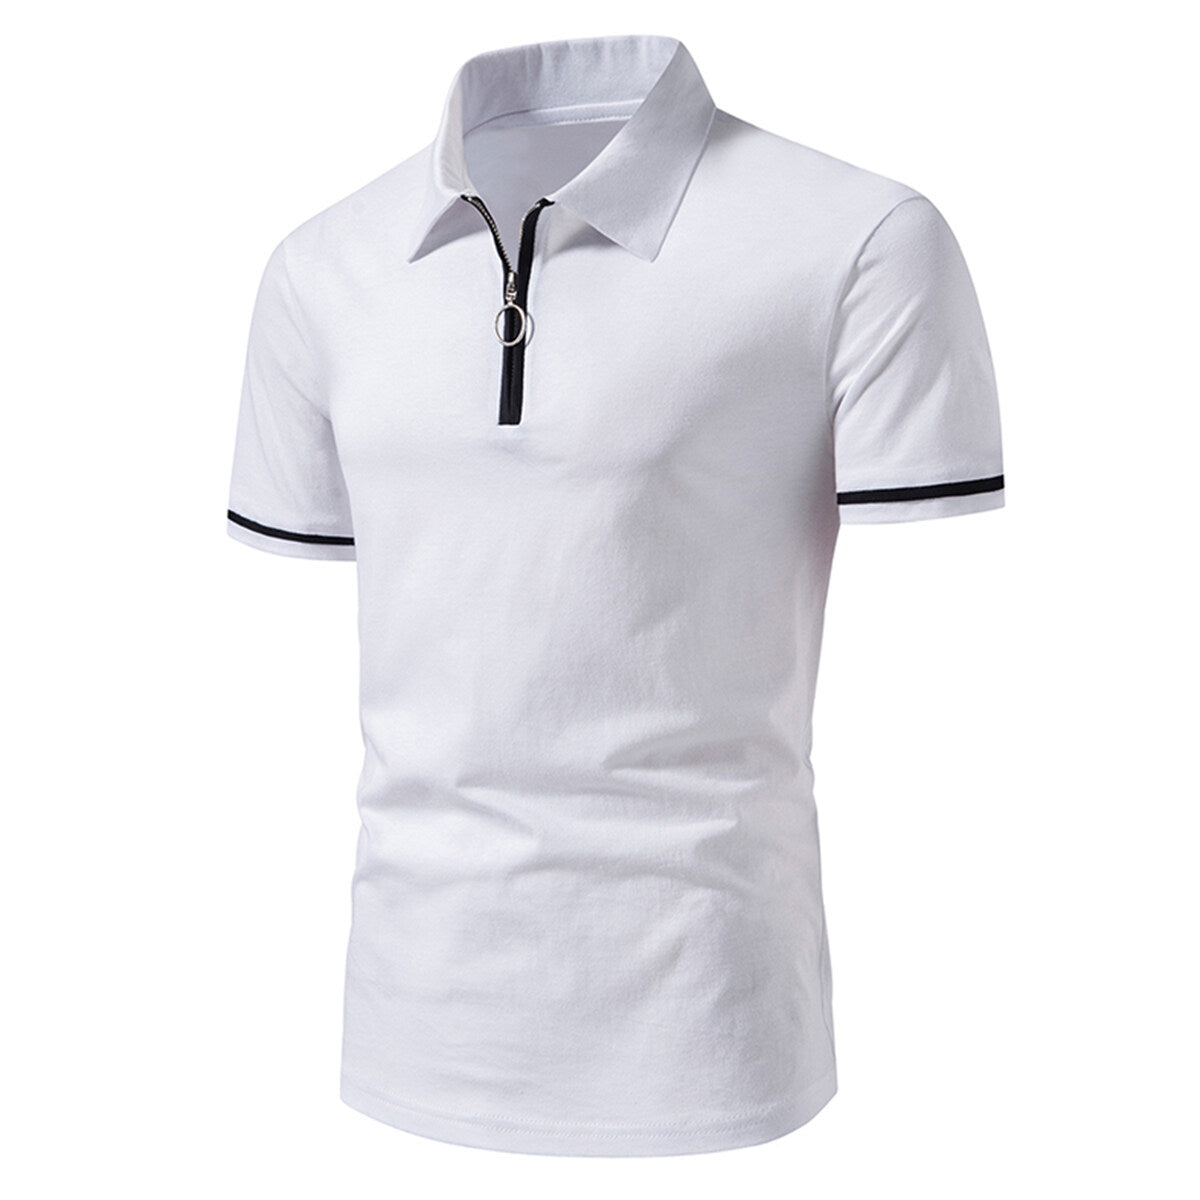 Men's Fitted Tailored Polo Neck Short-Sleeve T-Shirt White